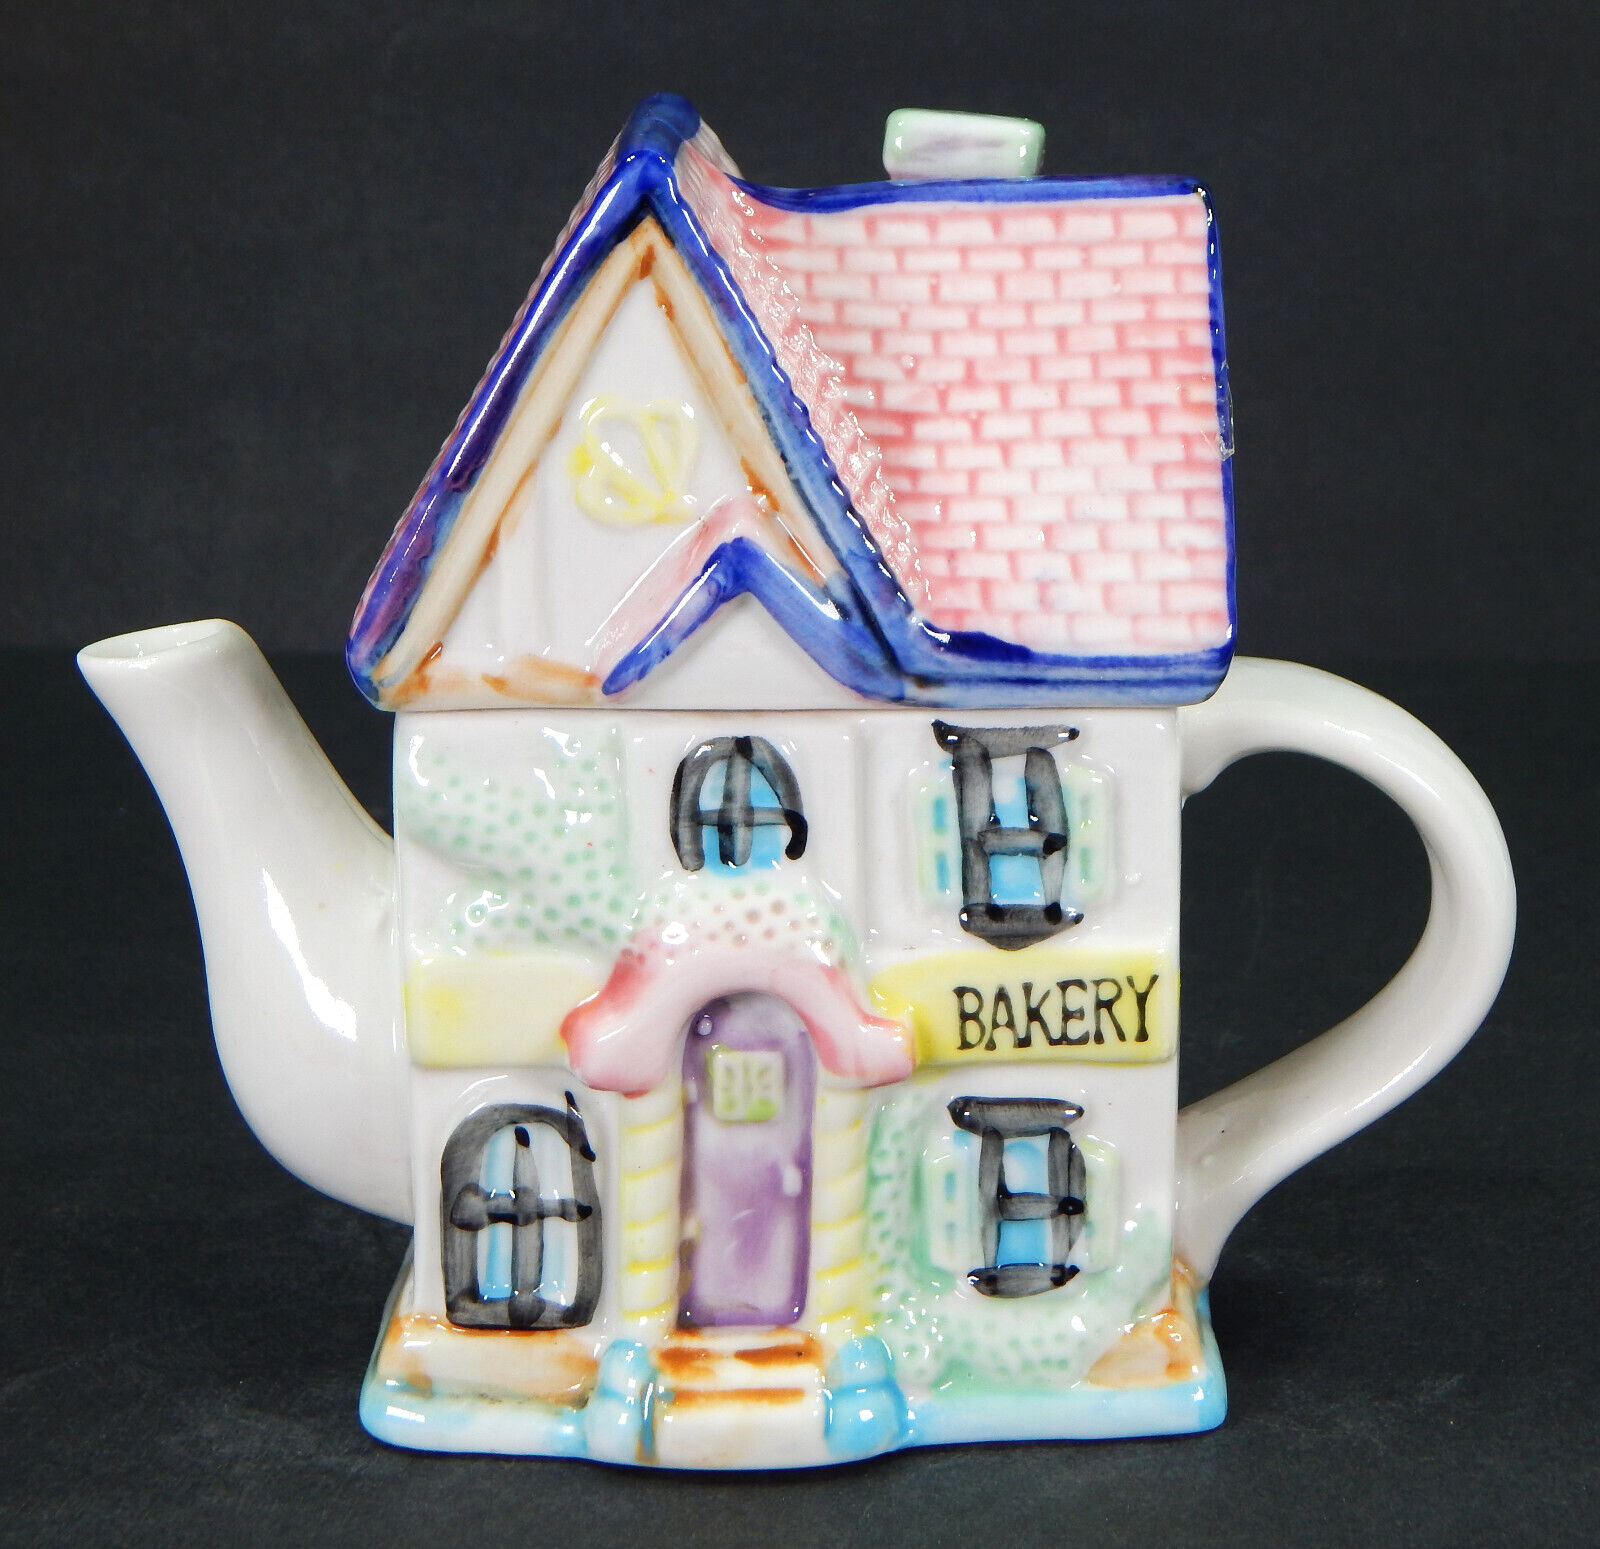 2000 COLLECTORS HAND PAINTED CERAMIC COTTAGE HOUSE BAKERY TEAPOT PINK & PURPLE